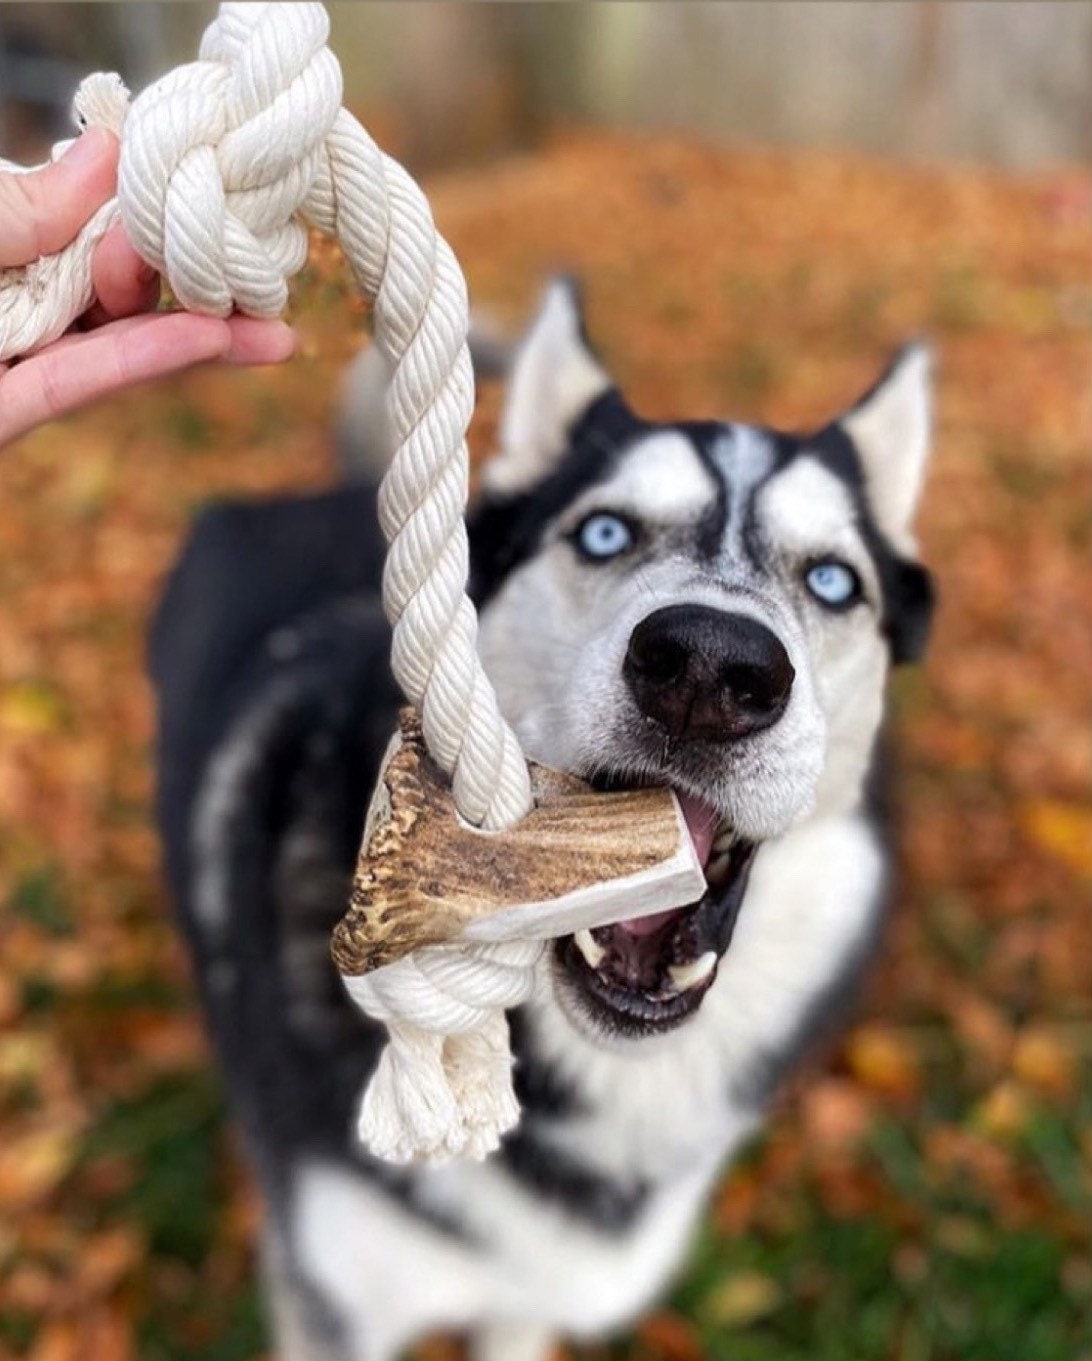 Elk Antler X-Large Split Rope Toy - All Natural, Grade A, Premium Antler Dog Treats, Organic Dog Chews, Naturally Shed Antlers from USA